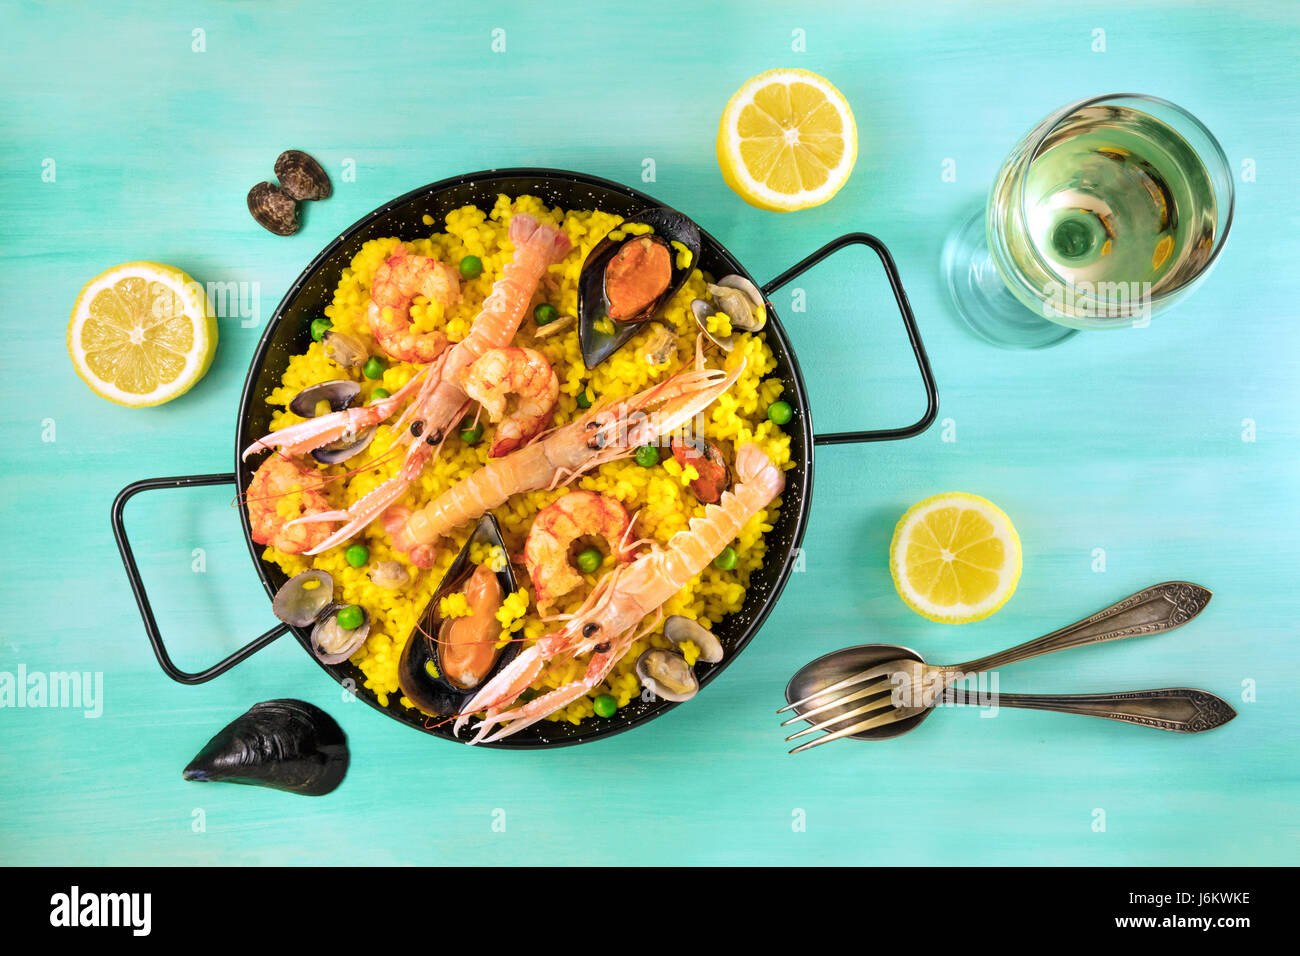 Photo of Spanish seafood paella in typical paellera, with slices of lemons, mussels and clams shells, glass of white wine, fork and spoon, and a place Stock Photo